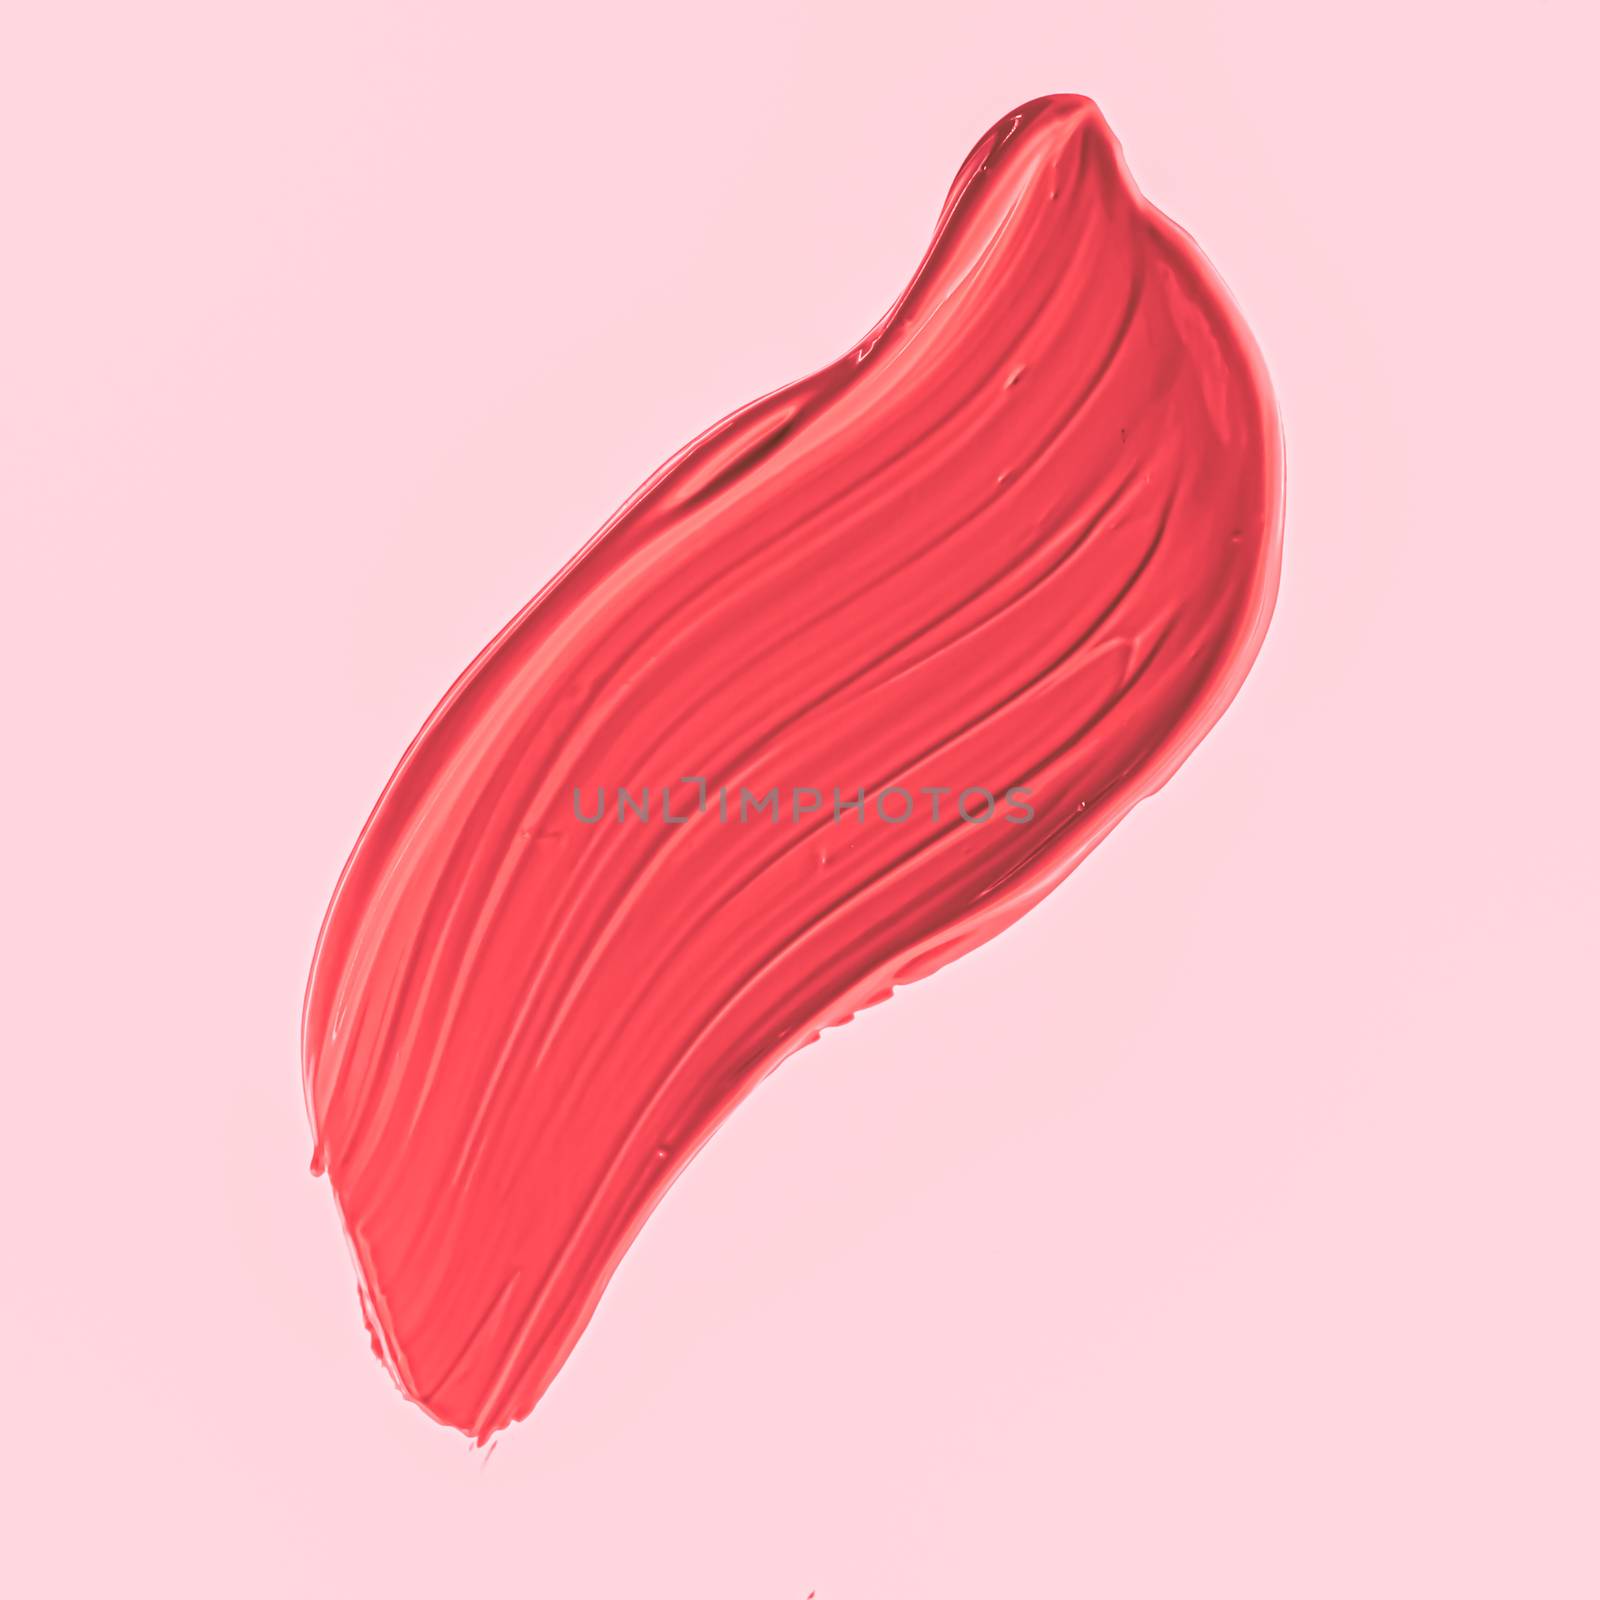 Red brush stroke or makeup smudge closeup, beauty cosmetics and lipstick textures